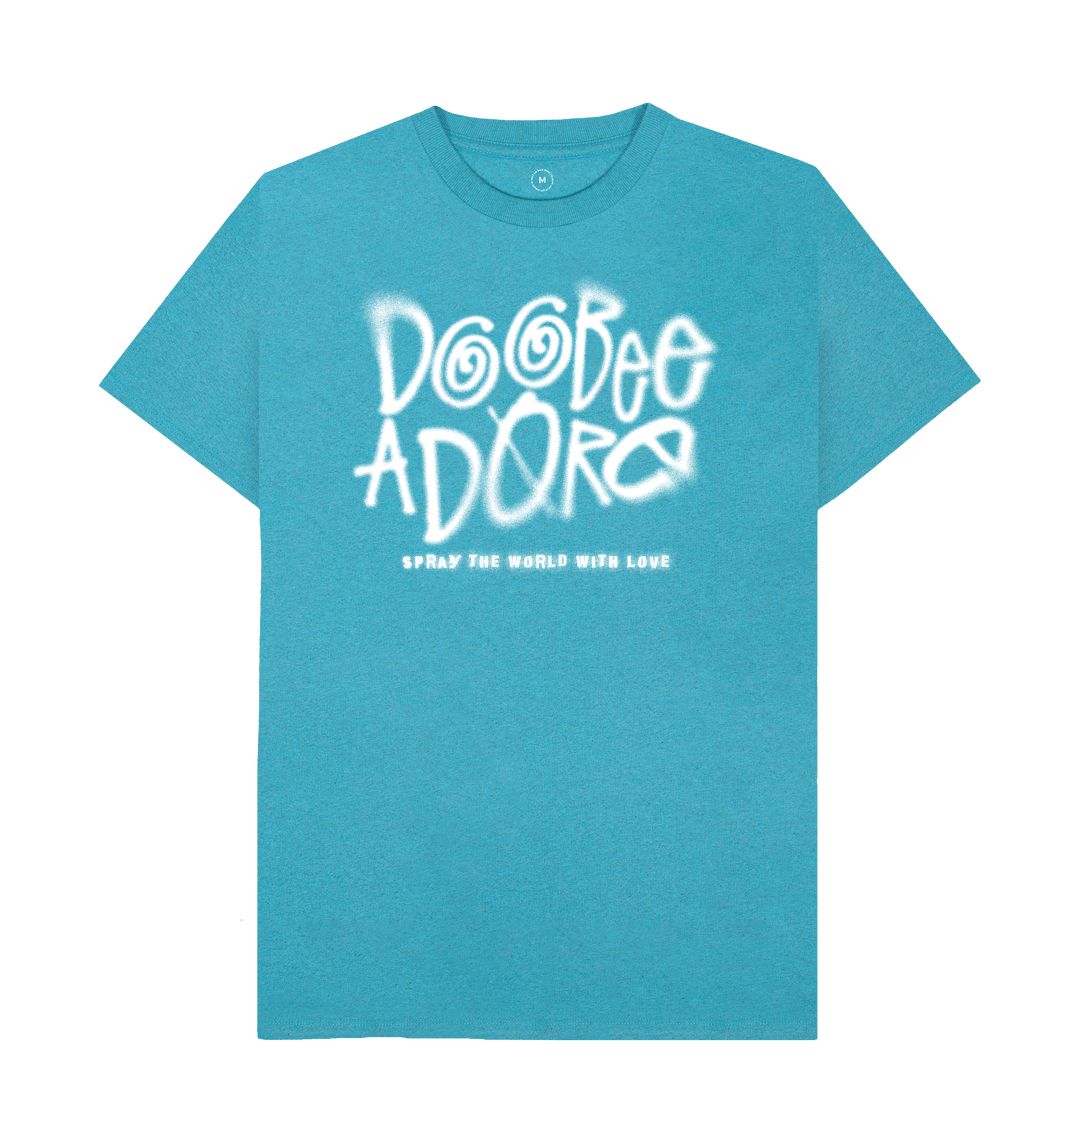 Ocean Blue Doobee Adore S.T.W. With Luv Collection T-shirt